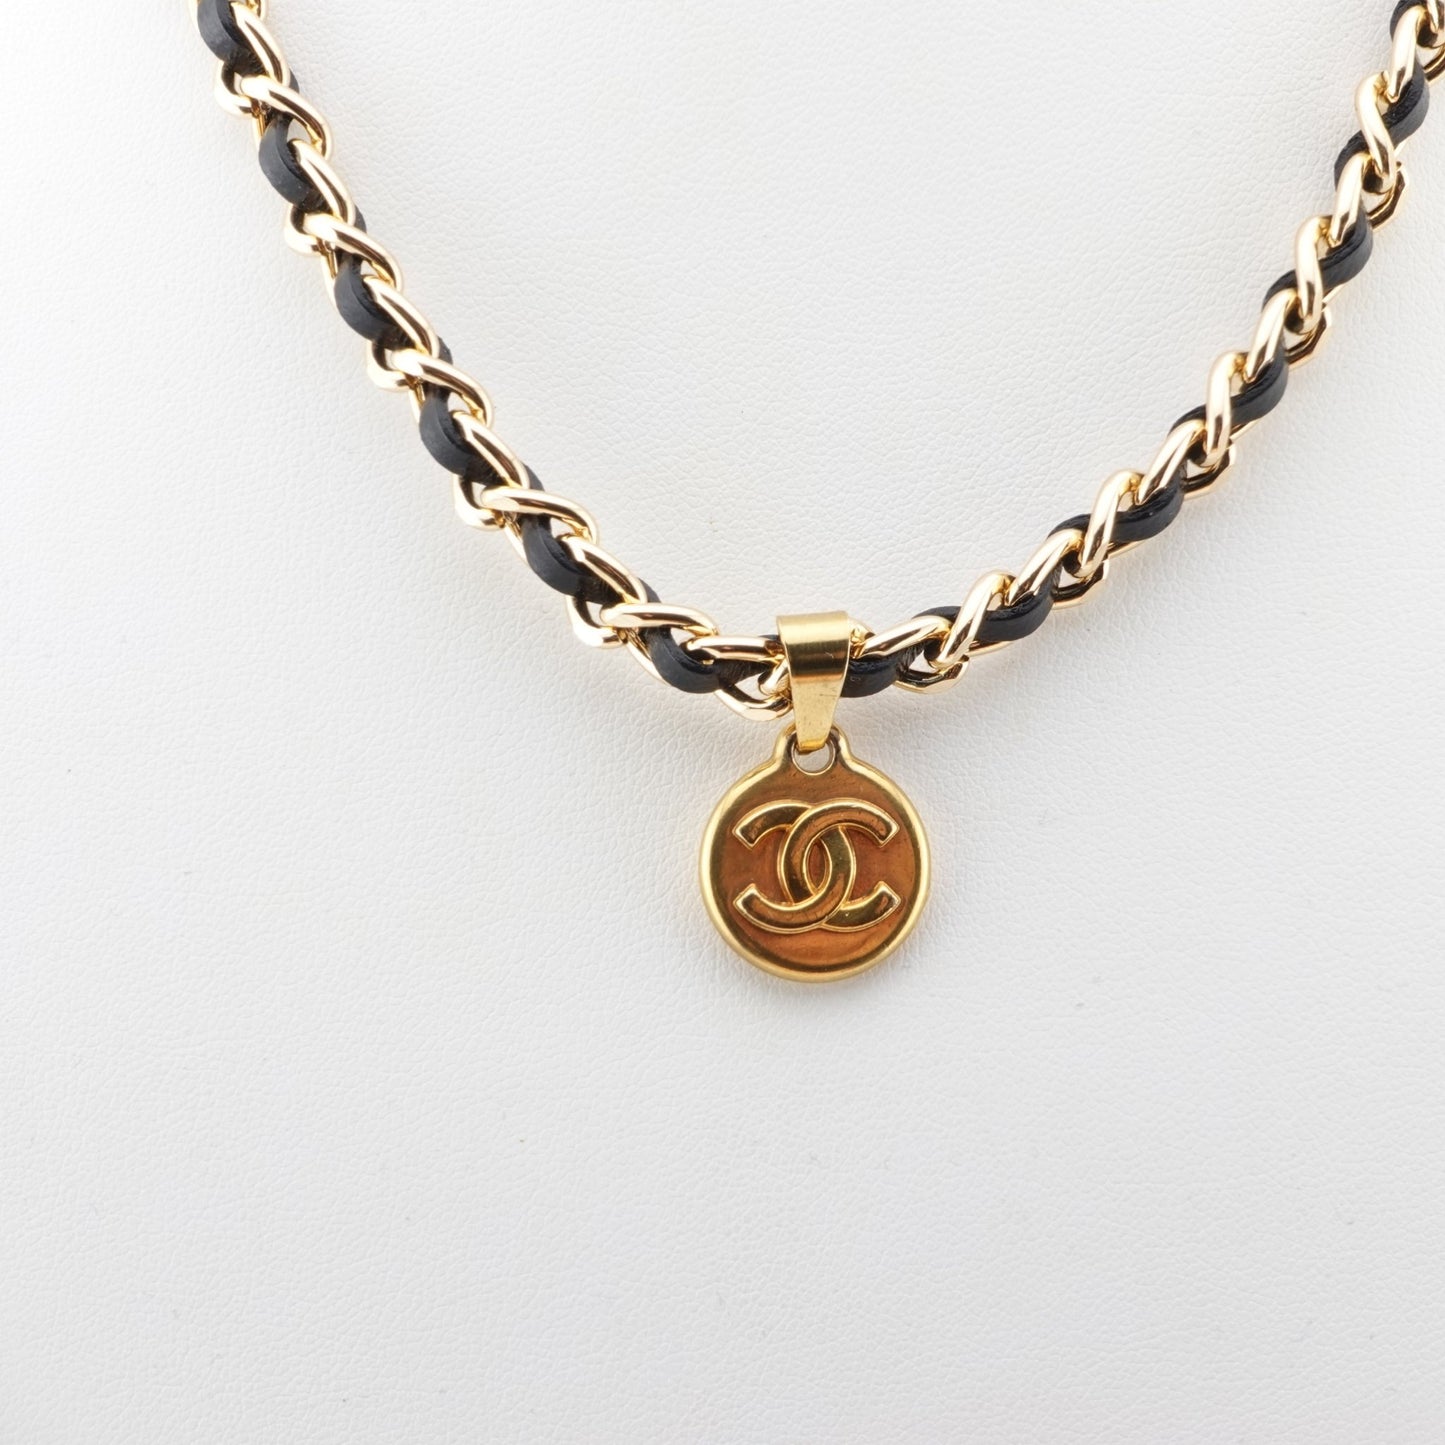 CHANEL Gold CC Logo Charm on Leather Chain Necklace - Bag Envy